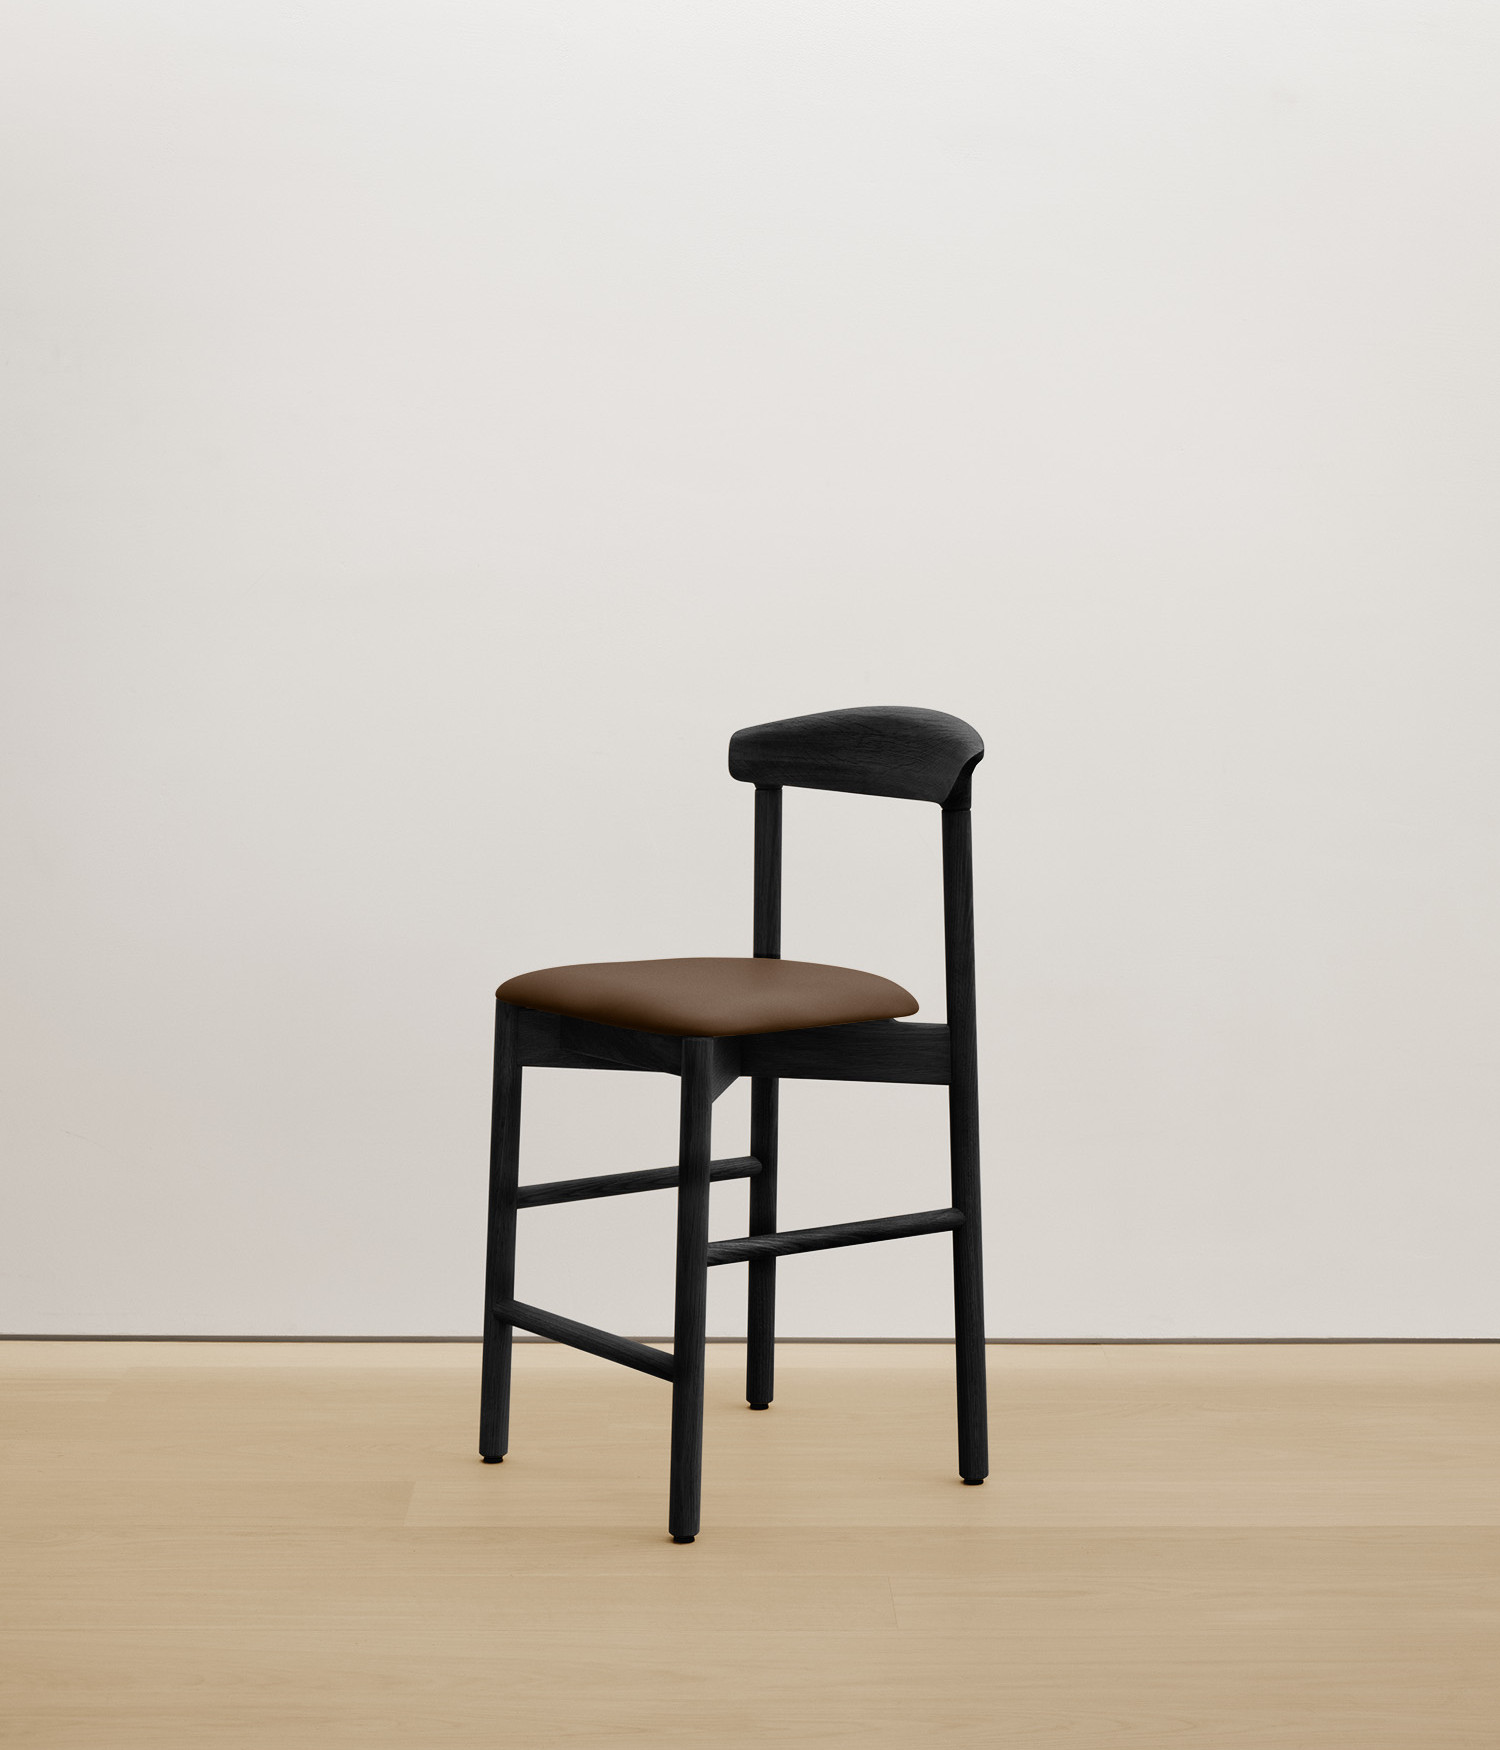  black-stained-oak stool with umber color upholstered seat